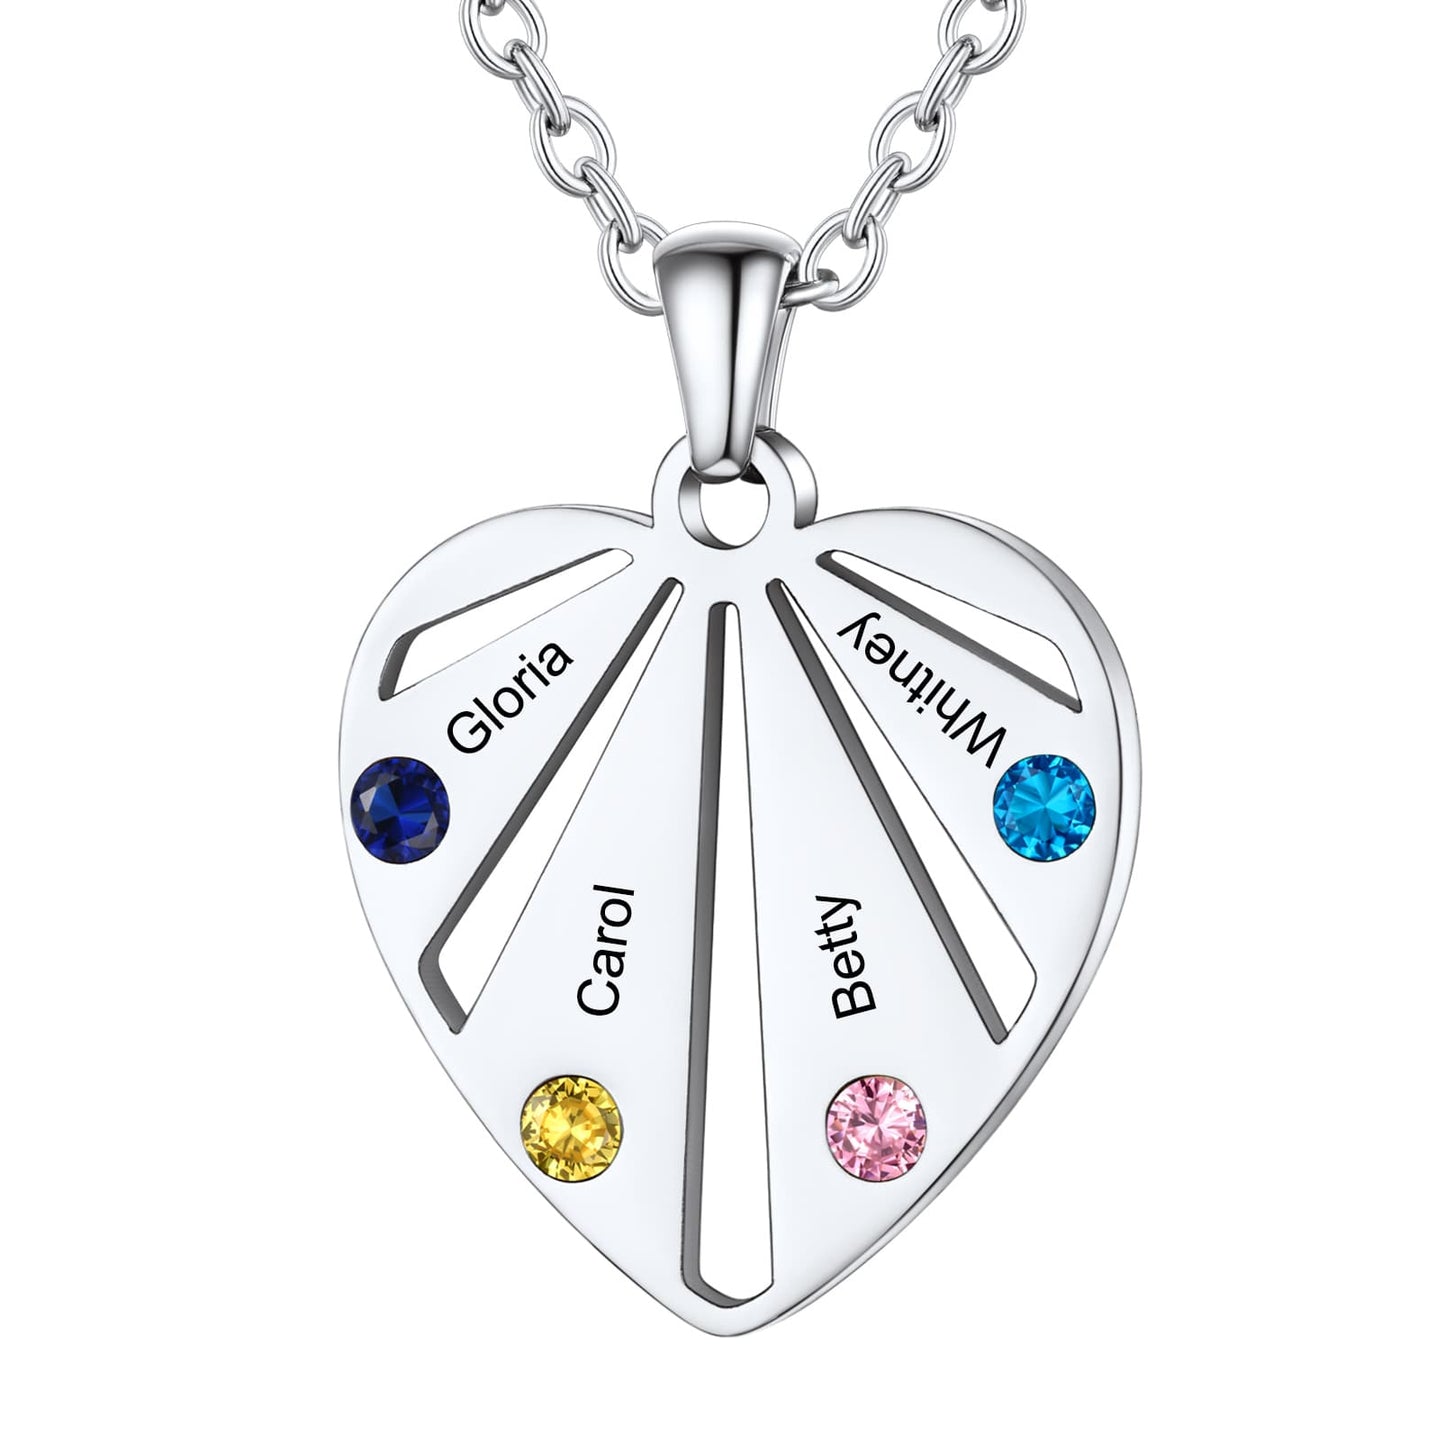 Personalized Engraved Heart Birthstone Necklace 4 stones silver